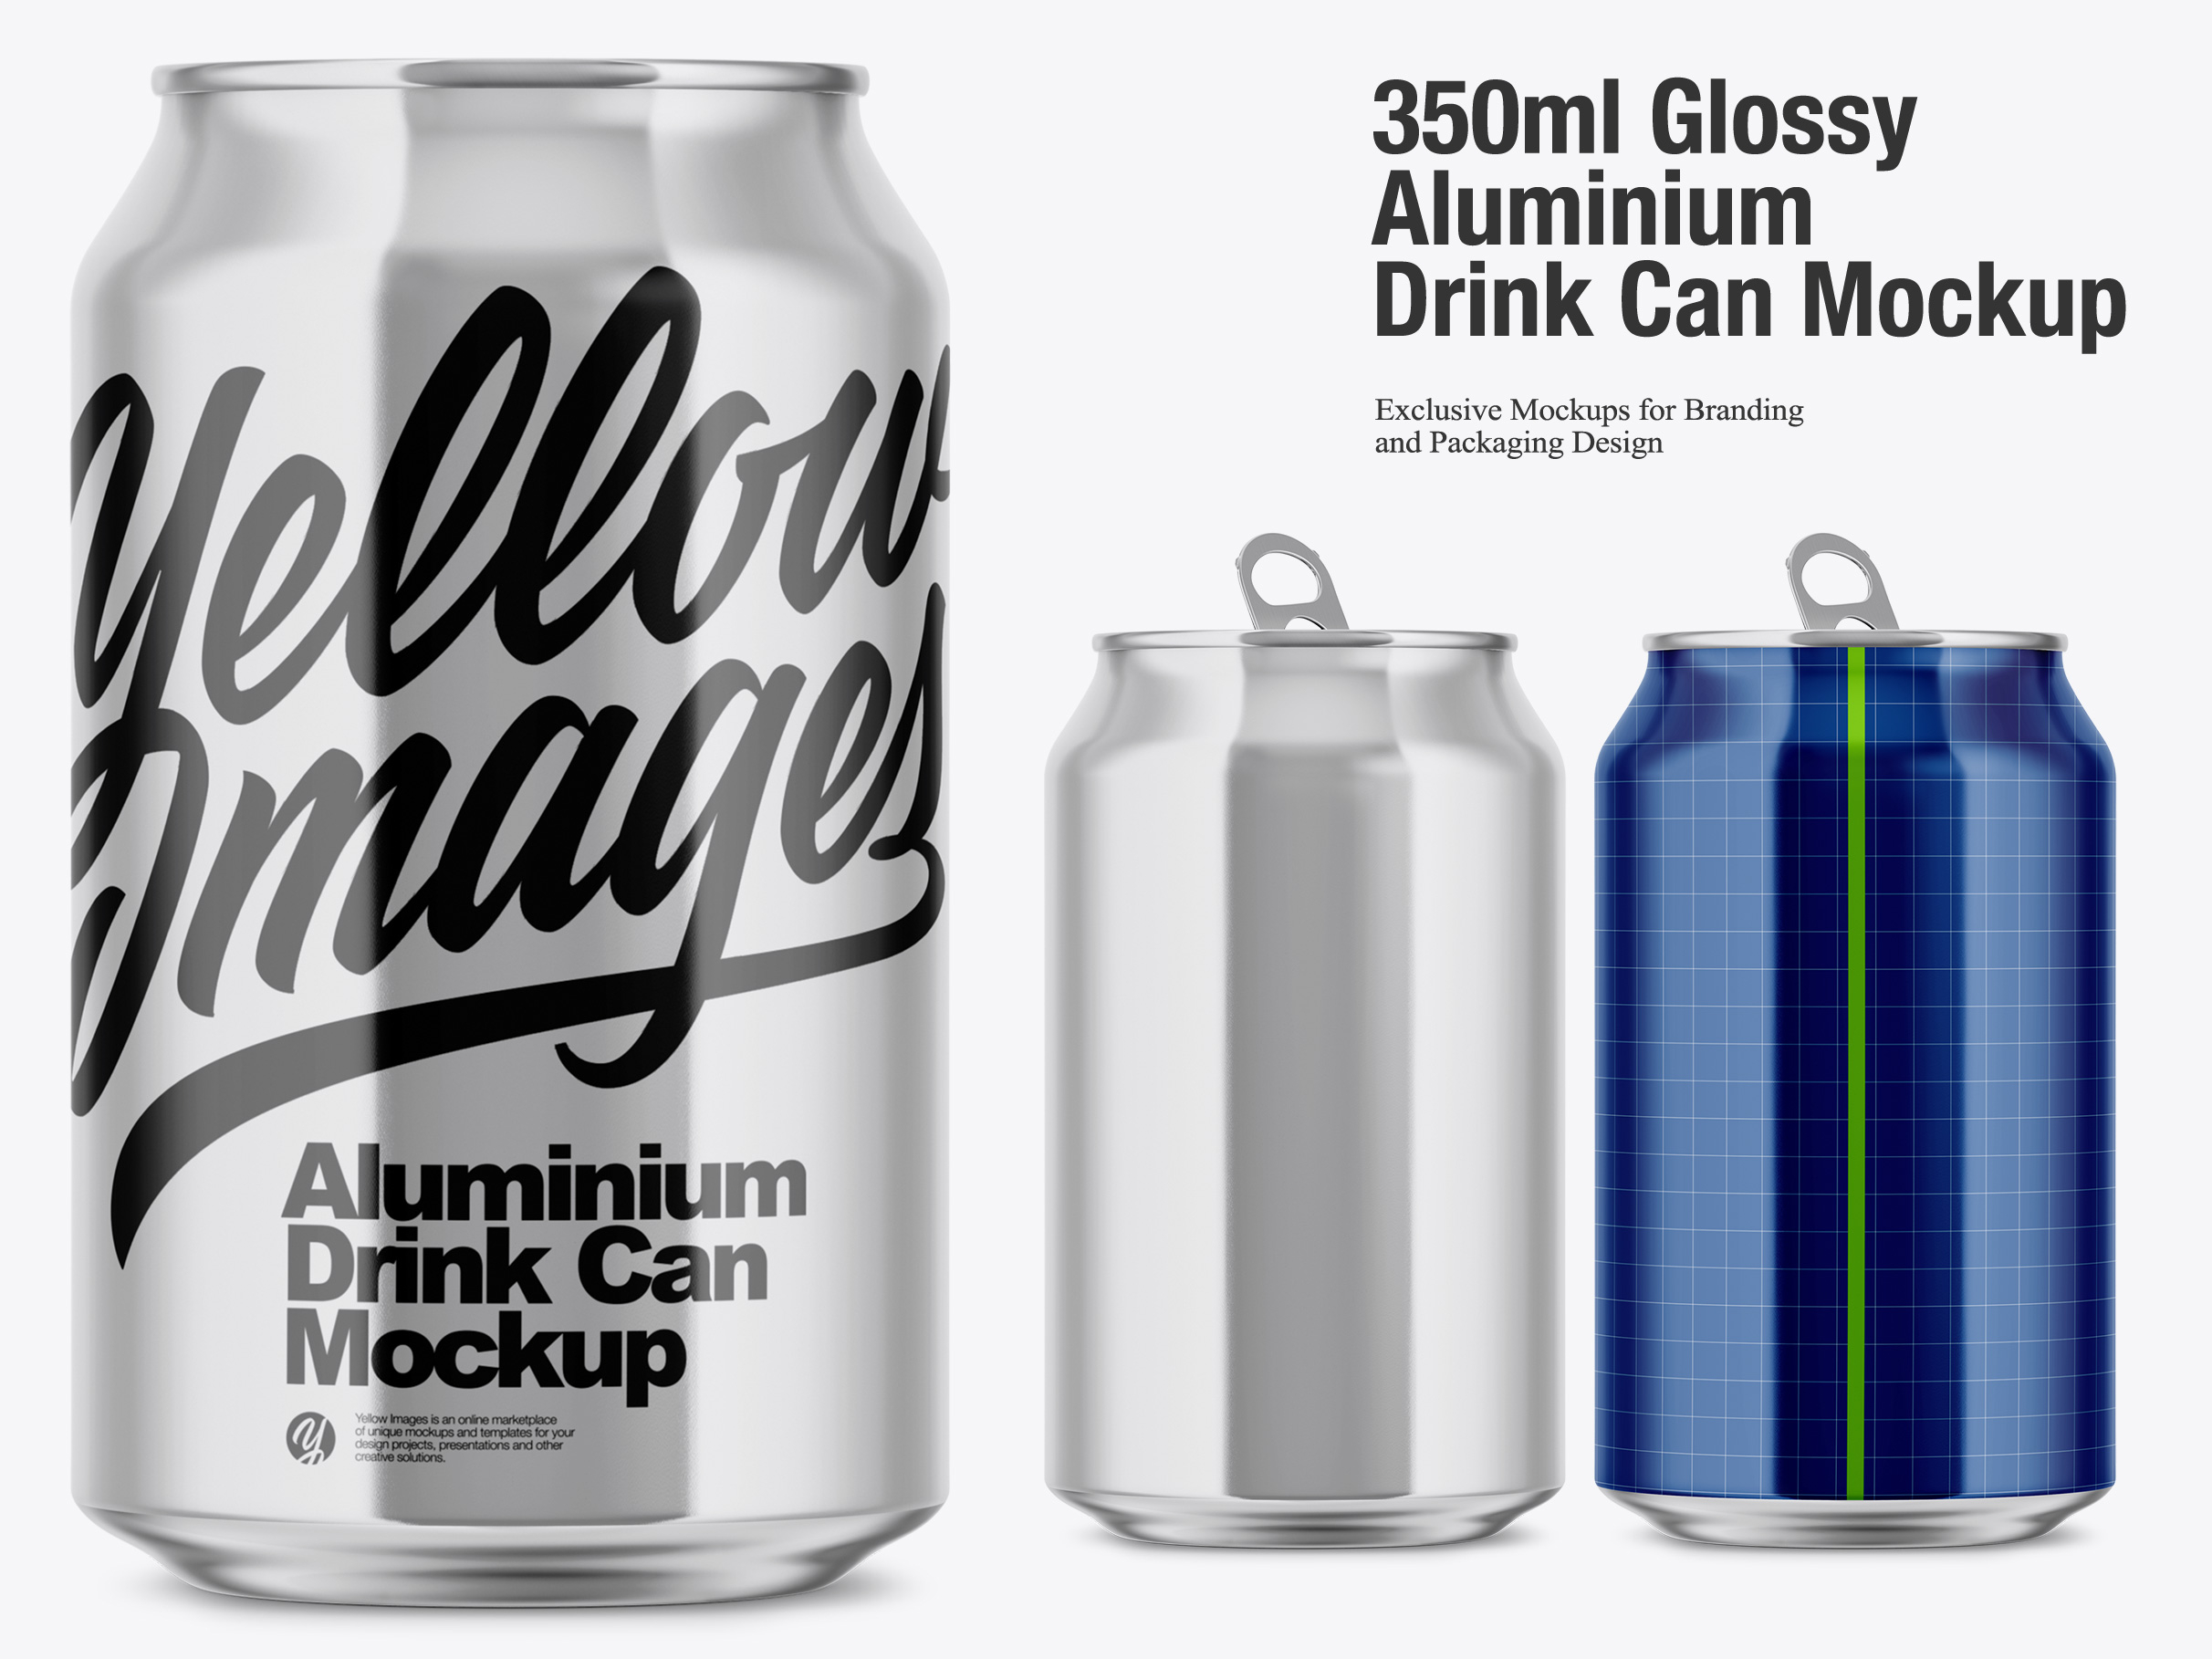 Download 350ml Glossy Aluminium Drink Can Mockup By Oleksandr Hlubokyi On Dribbble PSD Mockup Templates